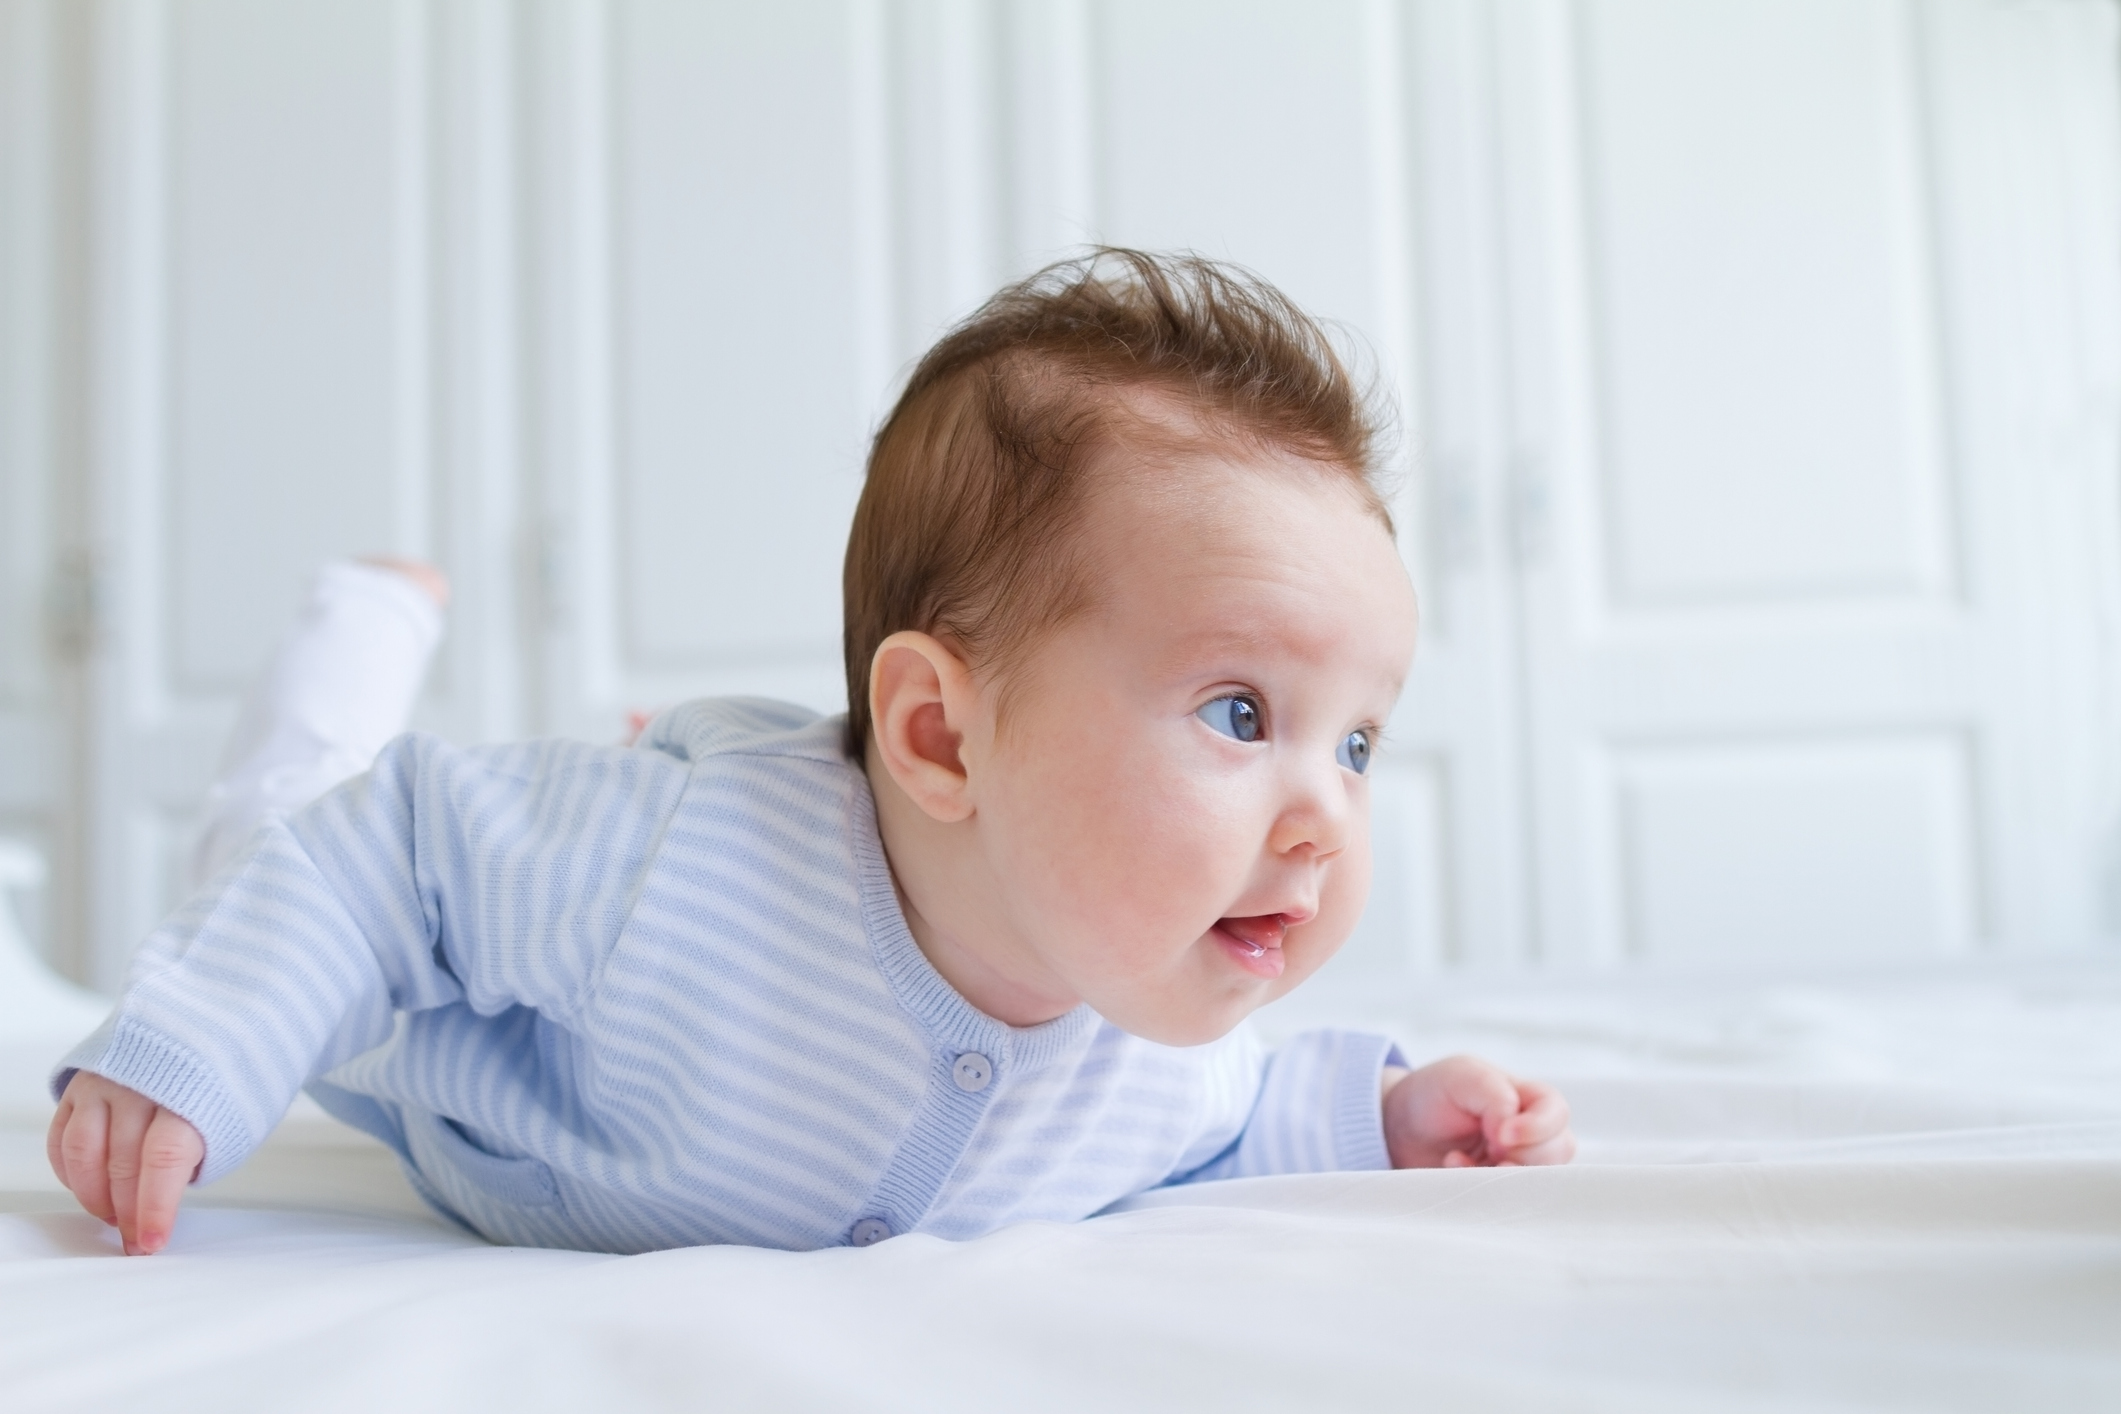 How to Make Your Little One’s Tummy Time Comfortable?